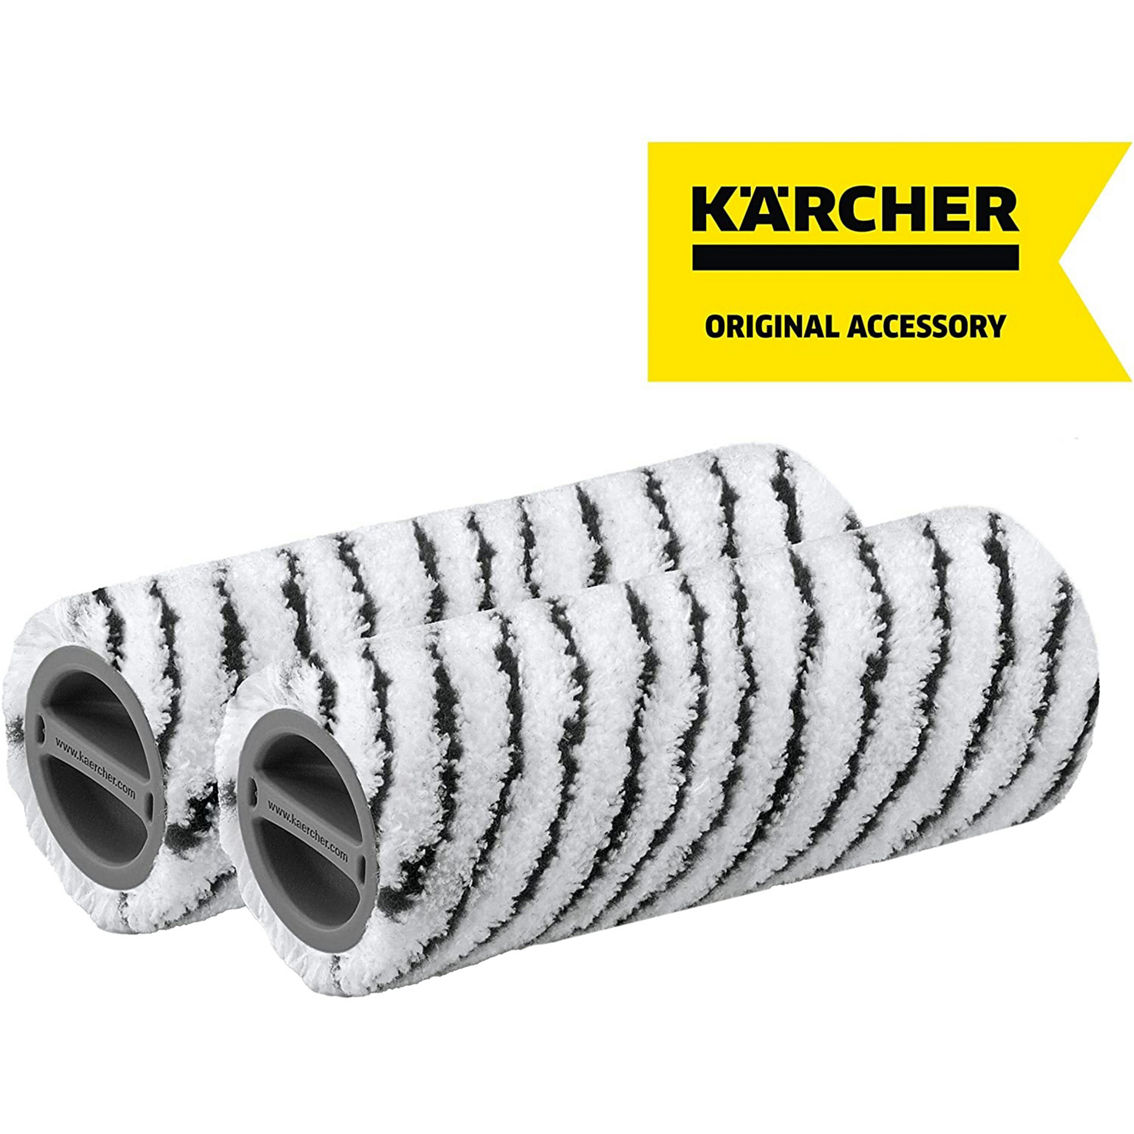 Karcher Floor Cleaner FC Stone Rollers 2 pk. - Image 2 of 4